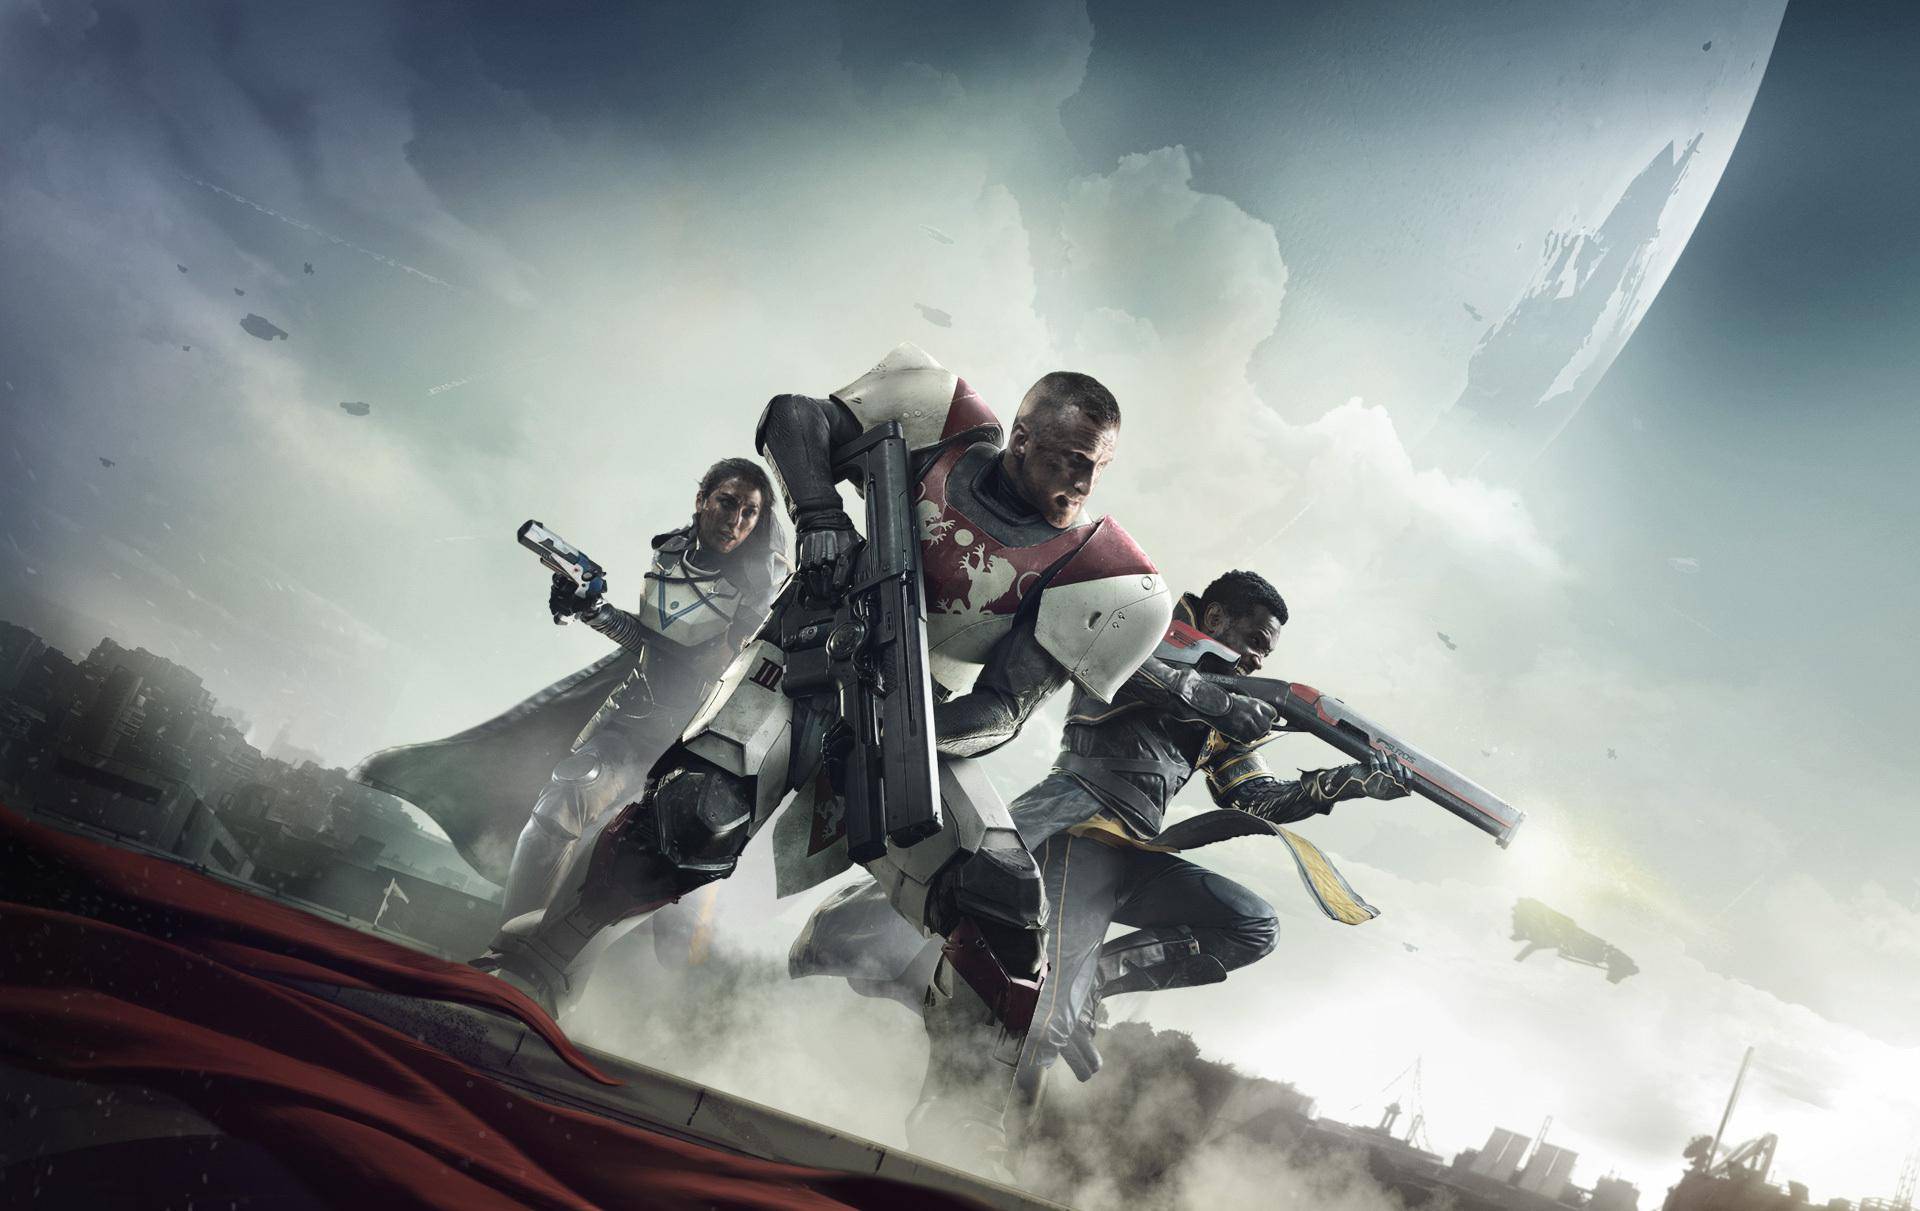 The release date of Destiny 2 on Steam is confirmed